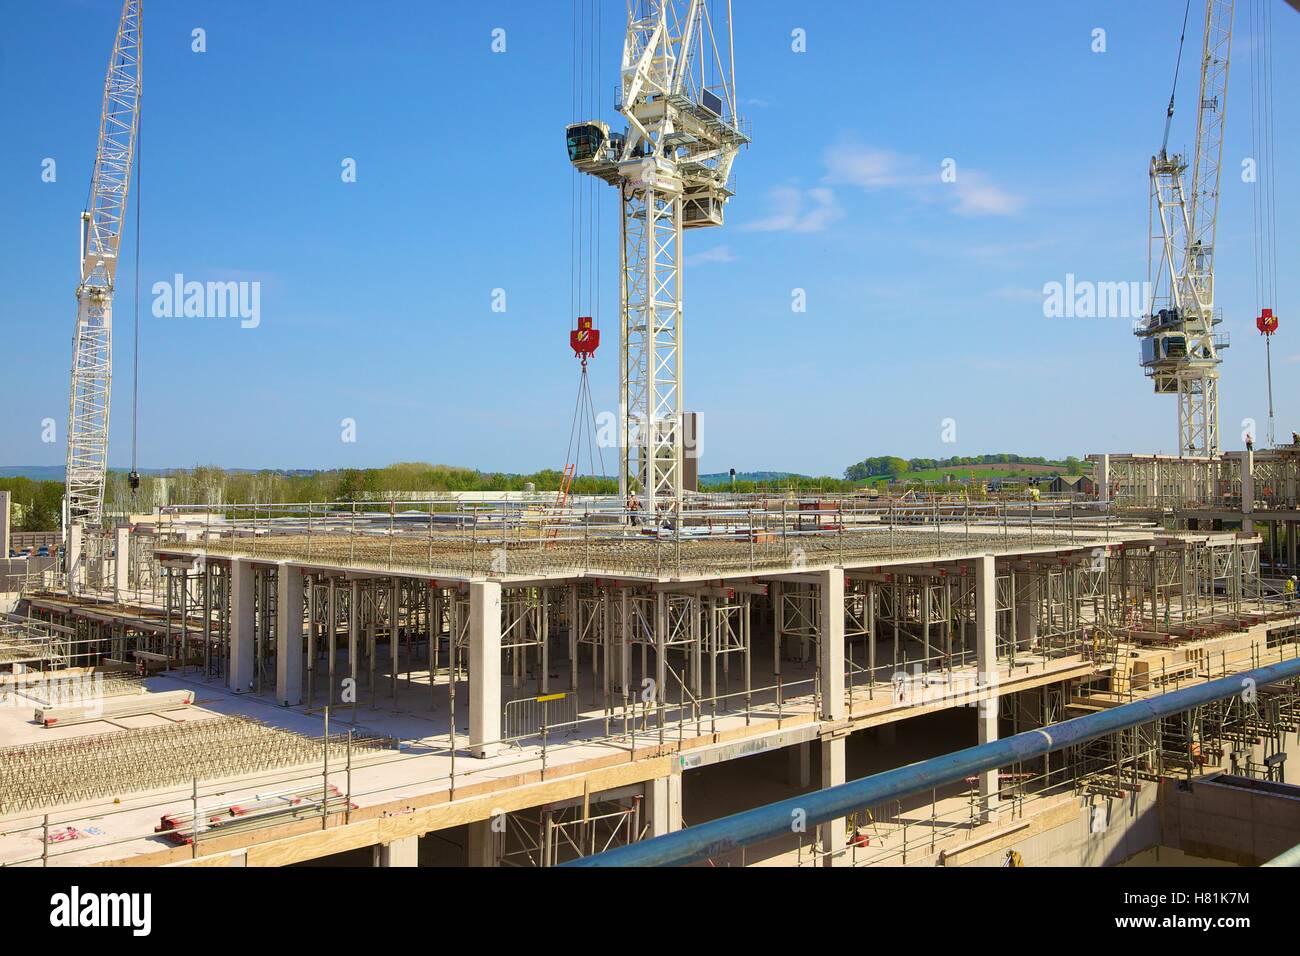 Construction using a crane. Workers wearing safety clothing on the building site. Stock Photo